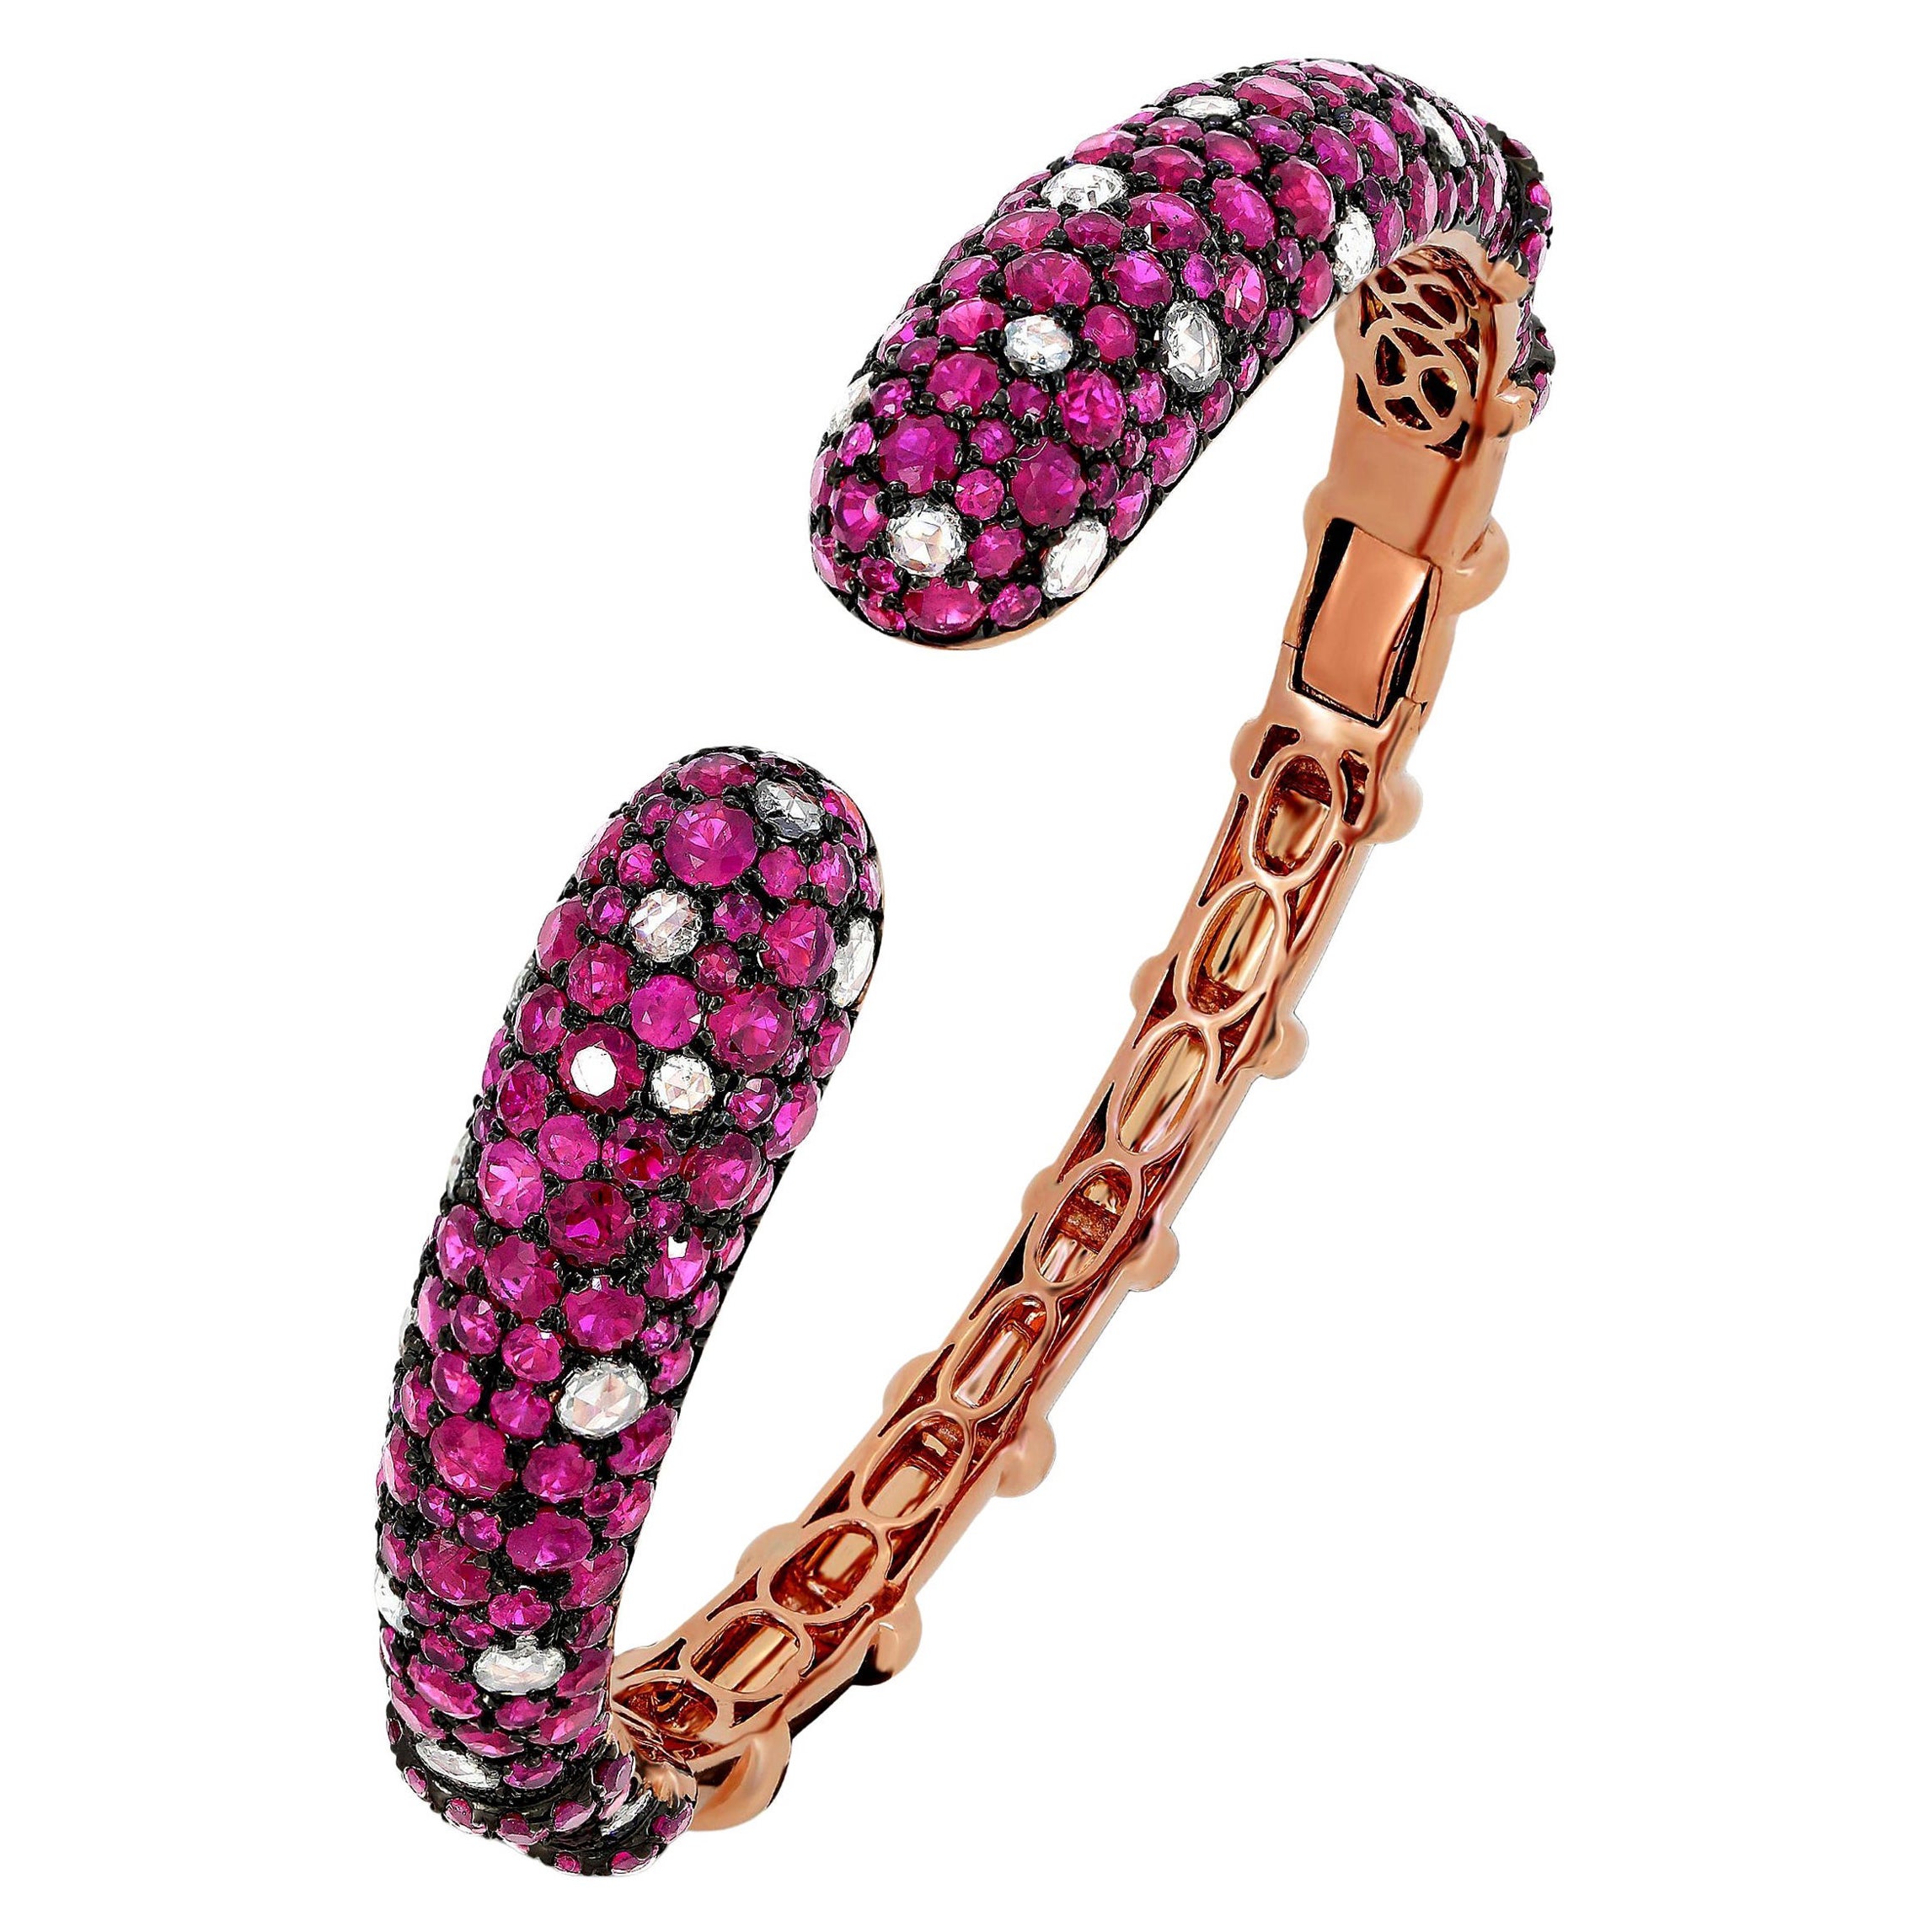 Nigaam 12.81 Cts. Ruby and 1.45 Cts. Diamond Cuff Bangle in 18K Rose Gold For Sale